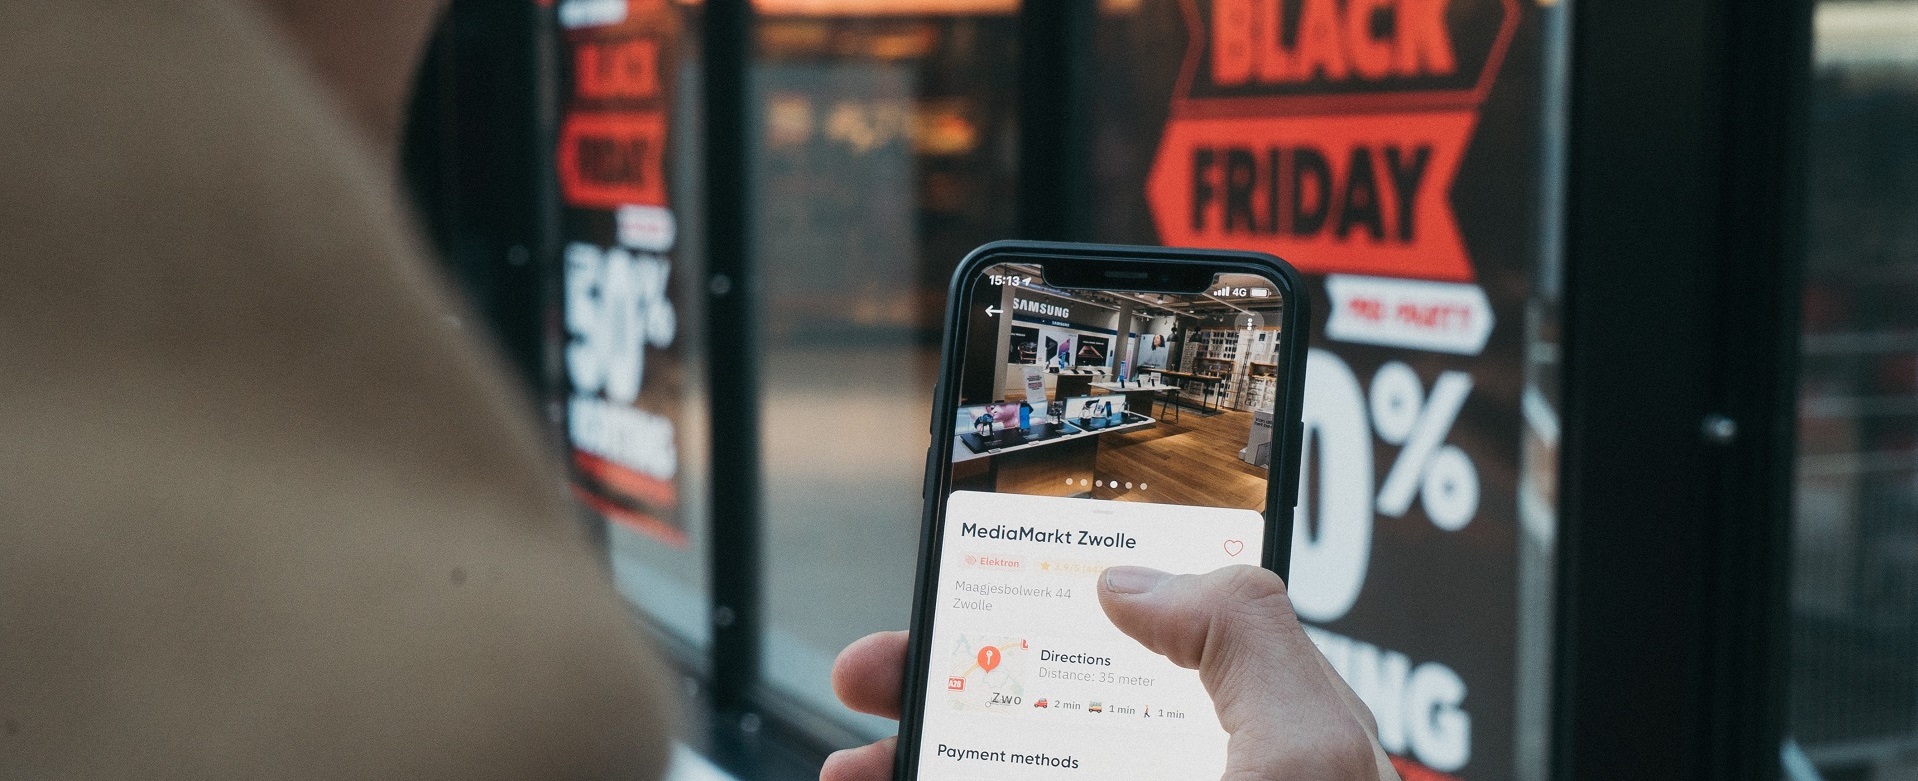 Black Friday sale shown on mobile phone